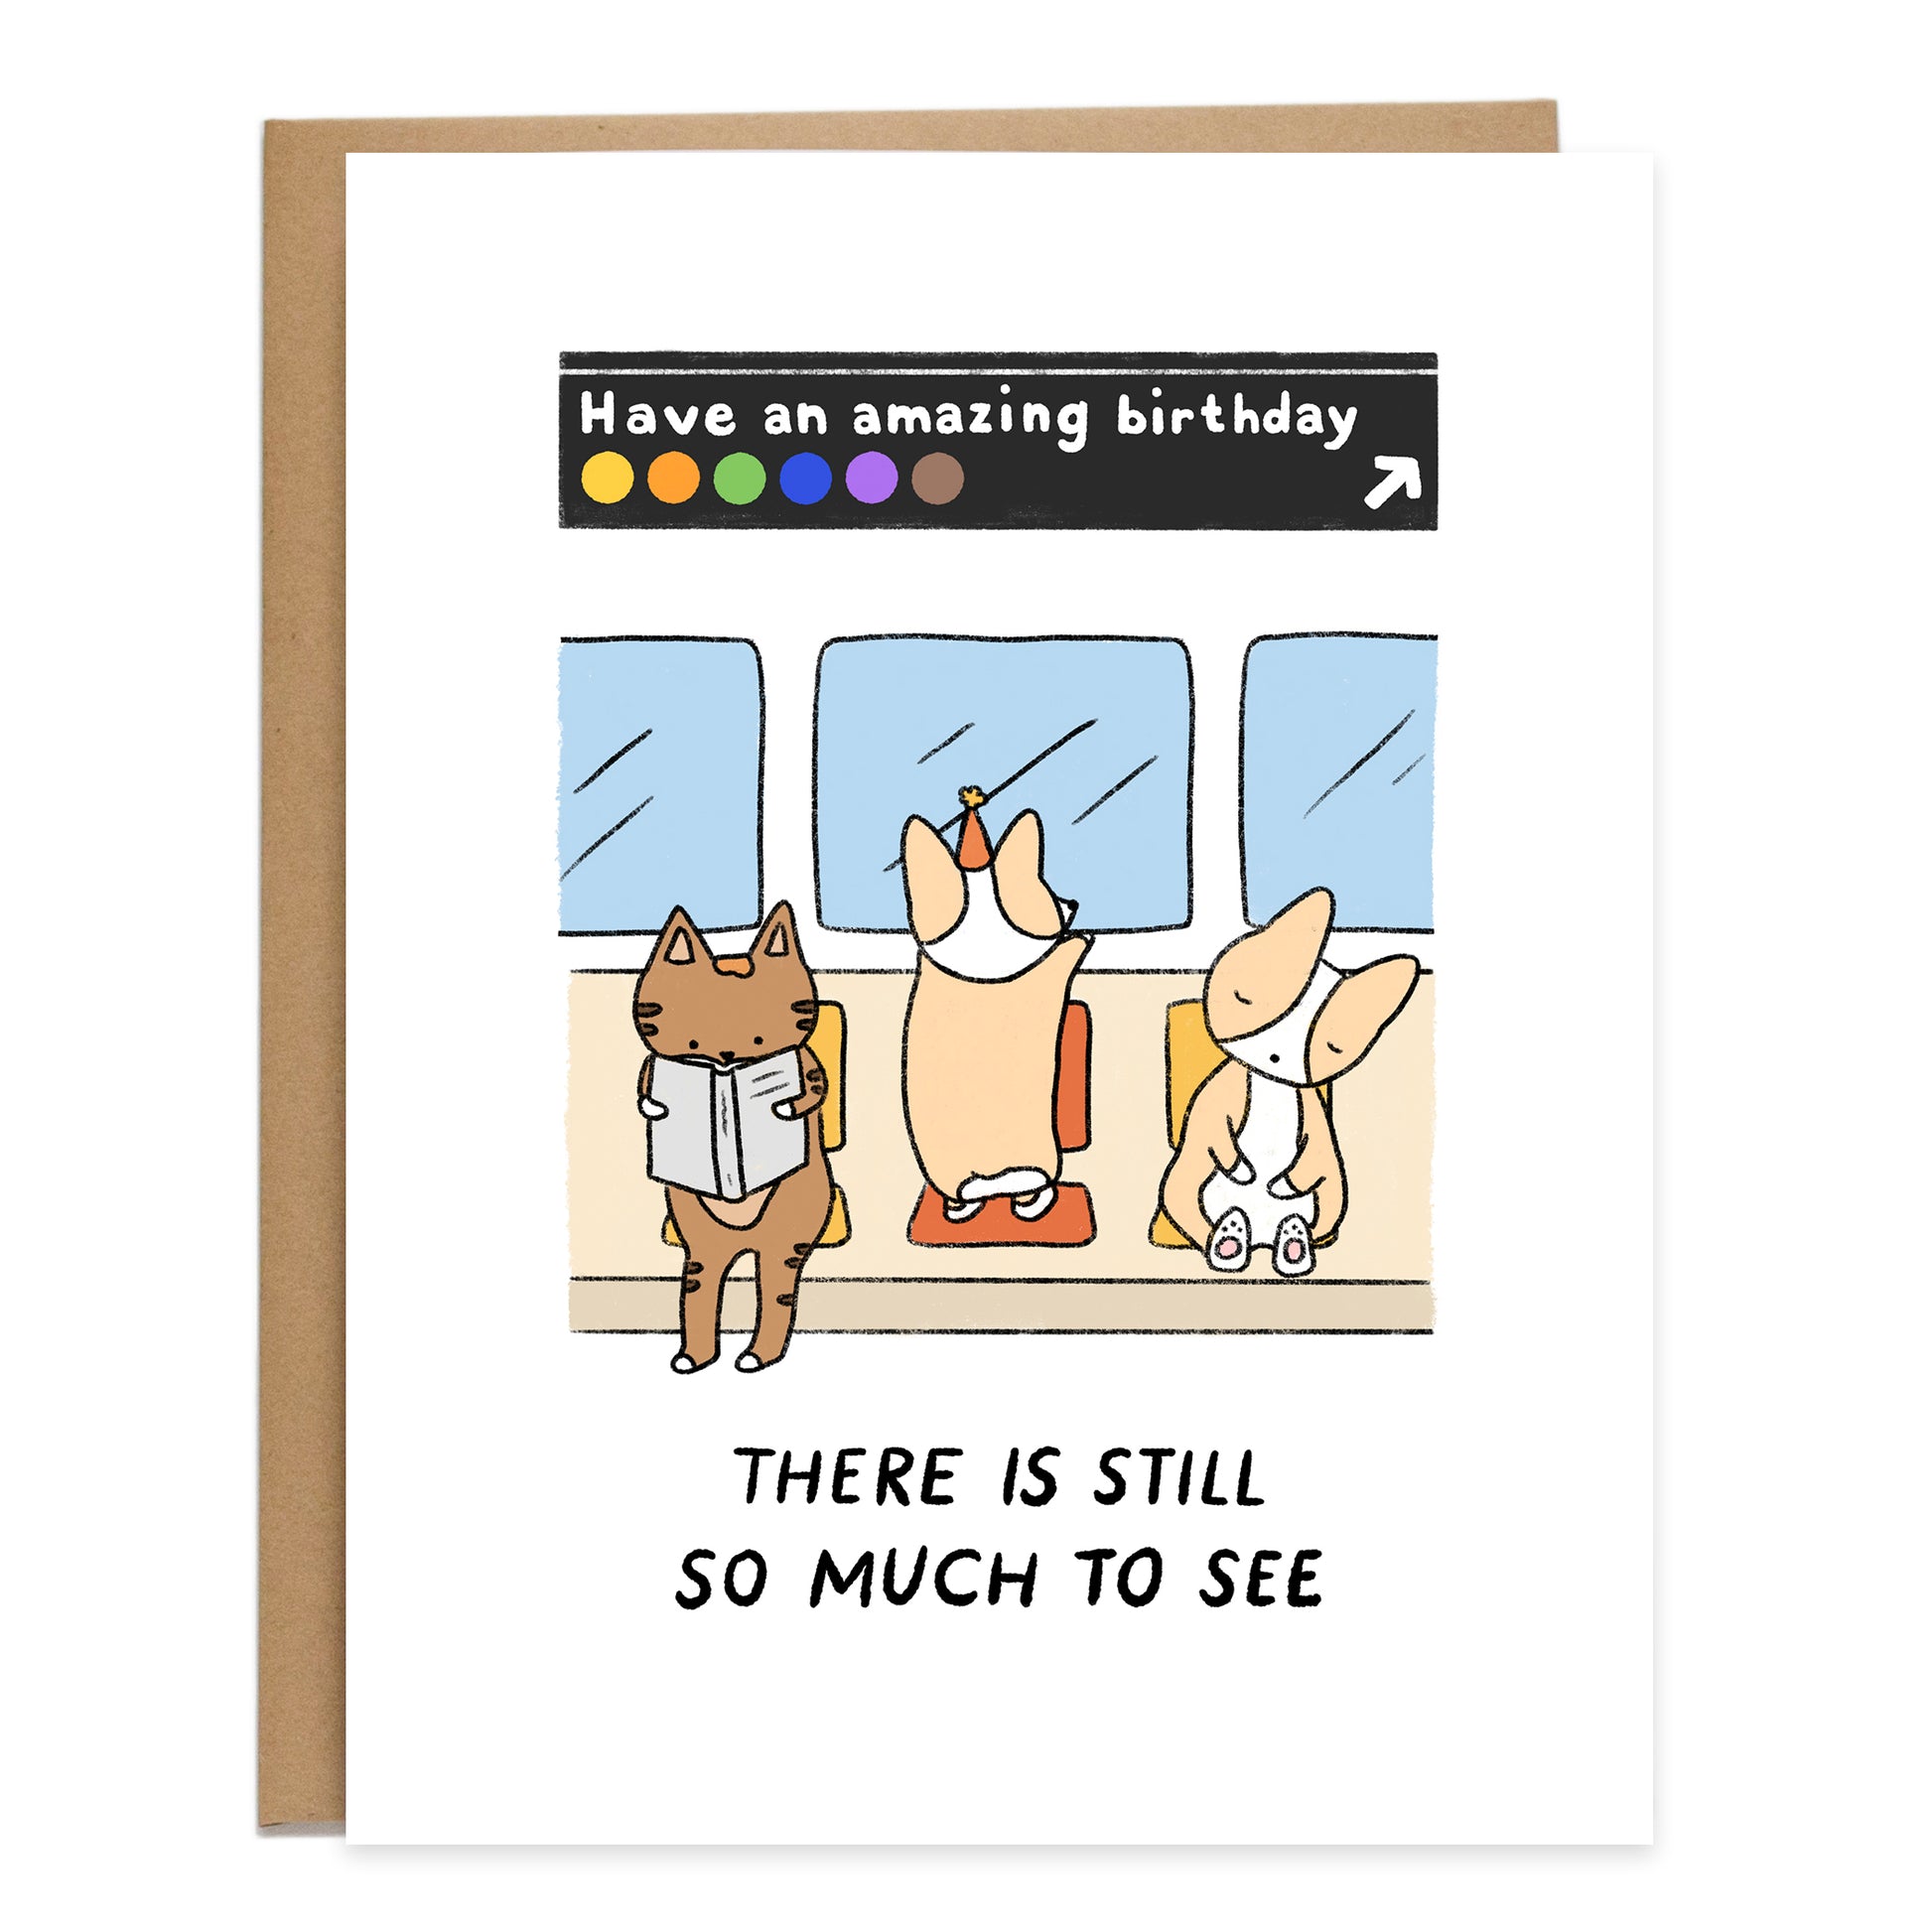 drawing is of three passengers sitting in an older yellow and orange subway train. to the left is a brown cat reading a book, in the middle is a corgi wearing a birthday hat standing up on the seat while looking out the window, and to the right is a sleeping corgi. text above reads, have an amazing birthday, styled as a subway sign and underneath it reads, there is still so much to see.